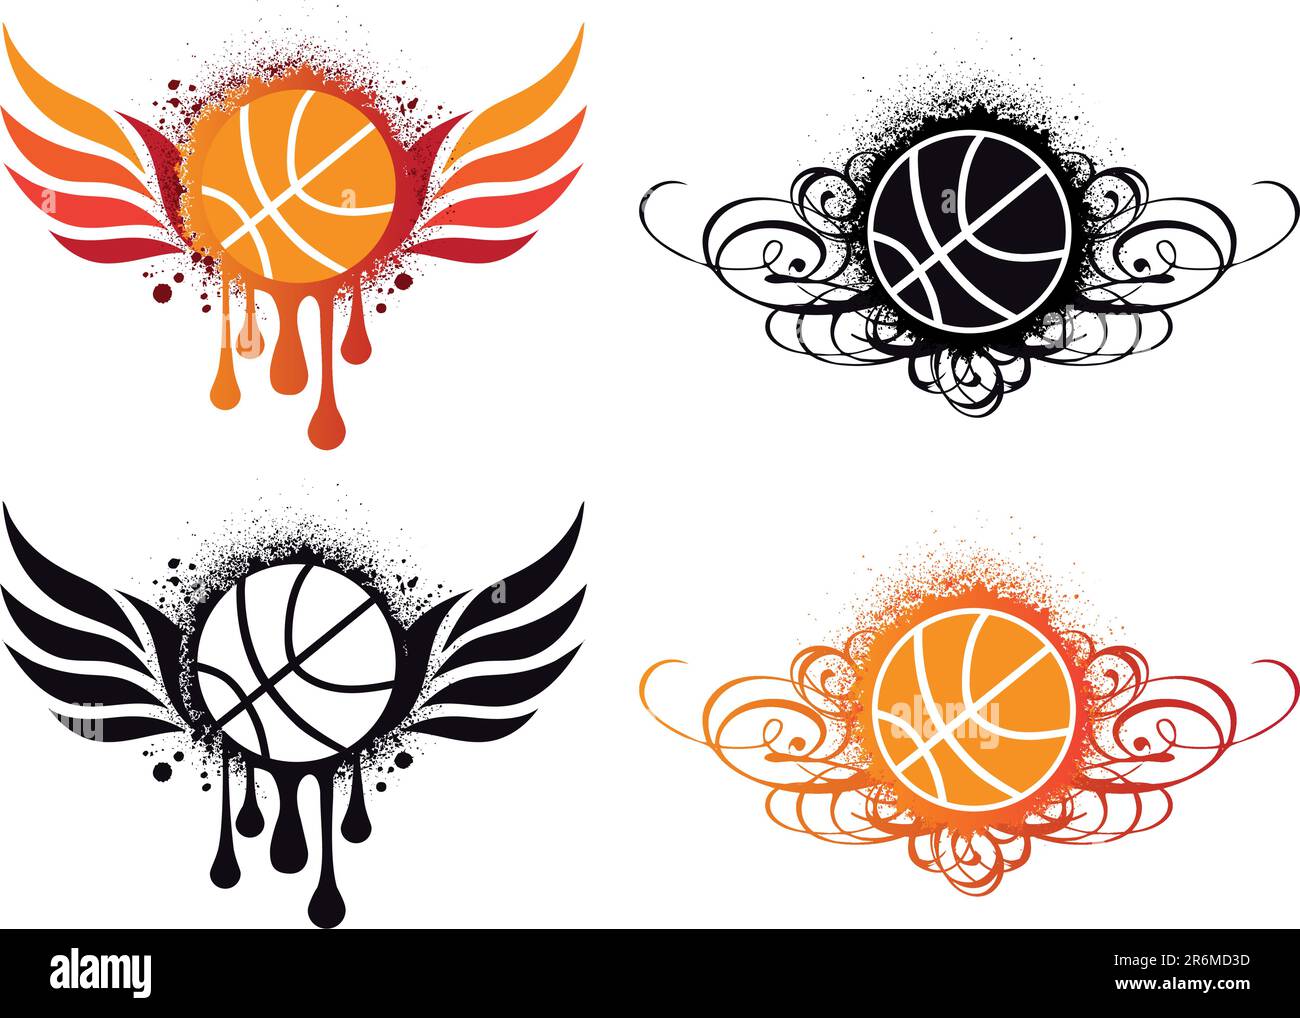 basketball with fire wing and ornament, vector Stock Vector